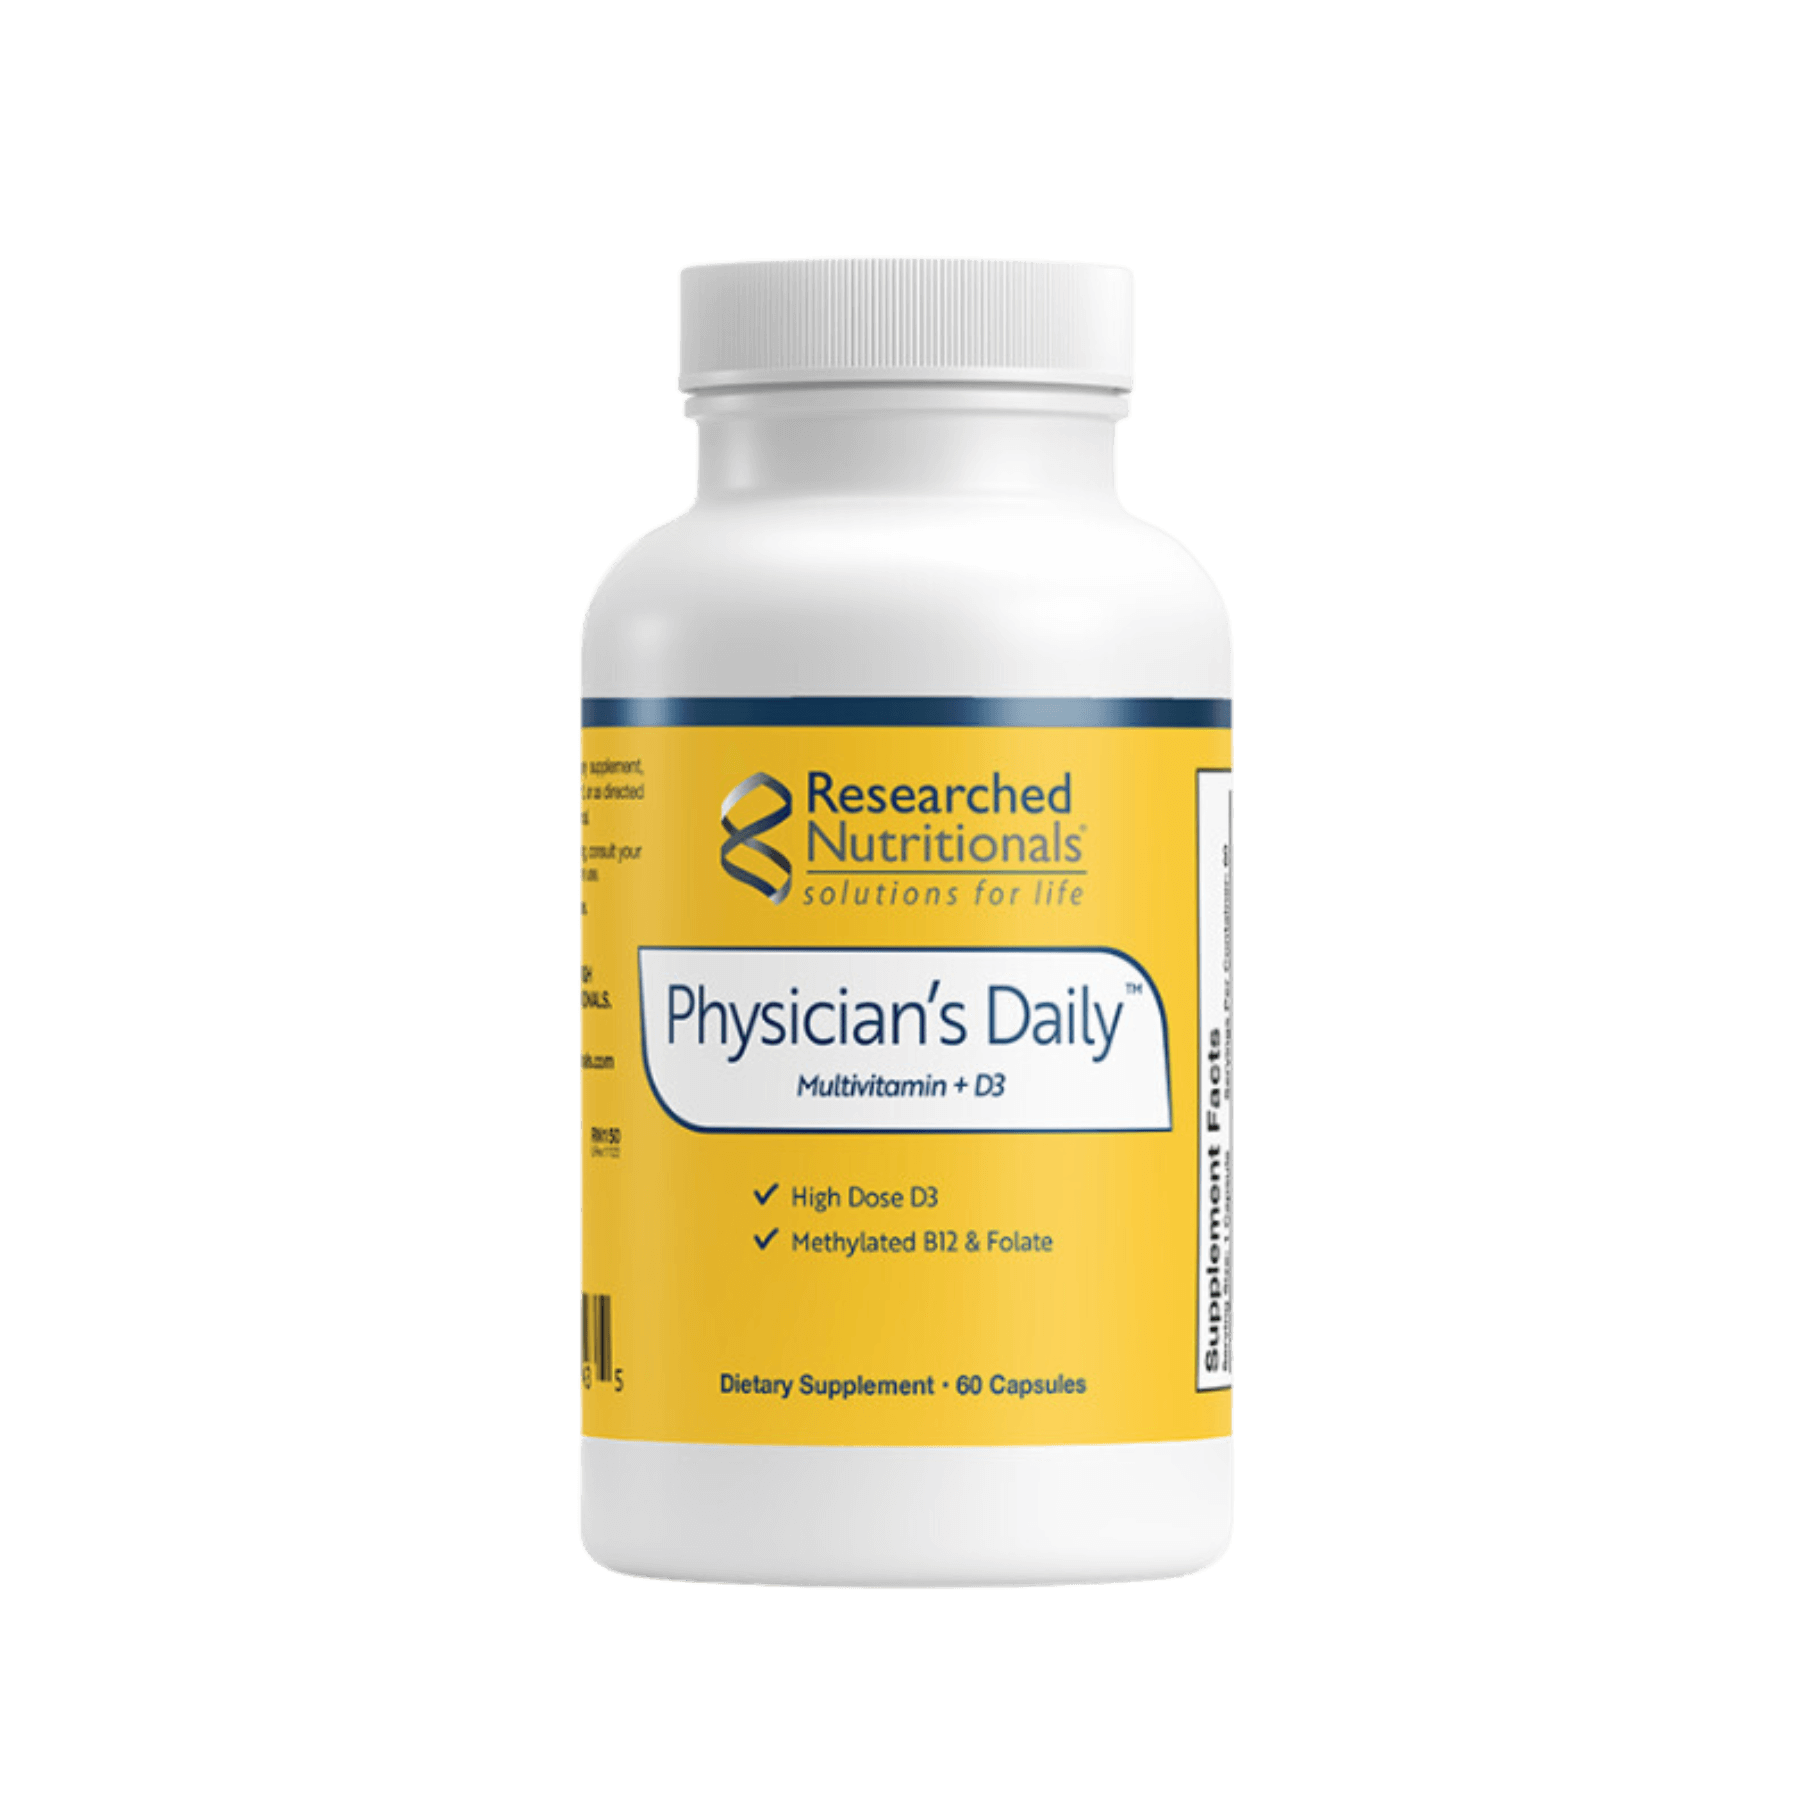 Researched Nutritionals Physician's Daily Multivitamin